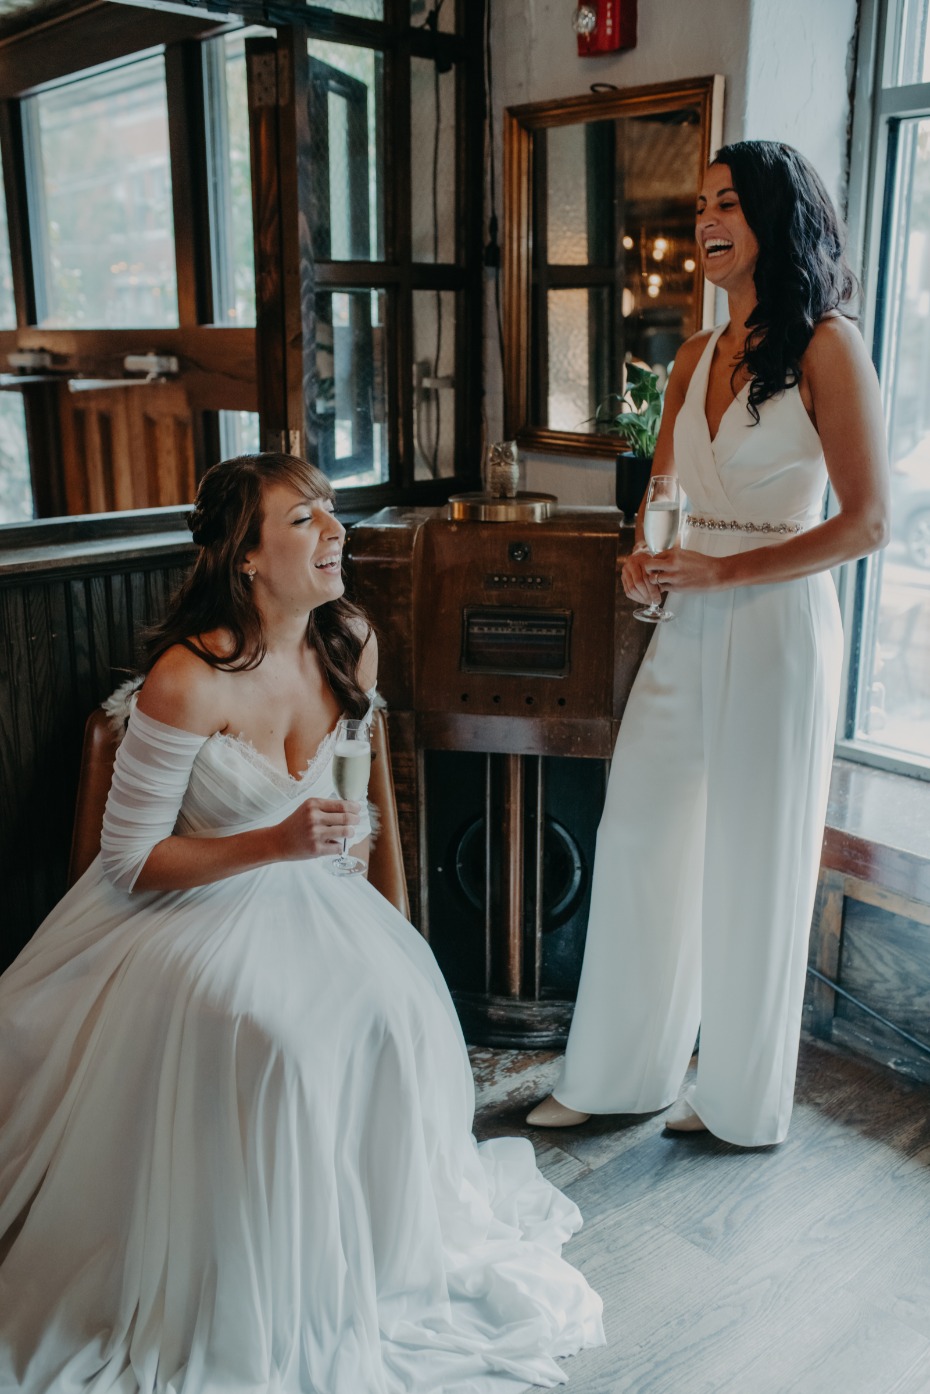 This Real Wedding at Brooklyn Winery Isnât Styled, Itâs Just Pure Magic